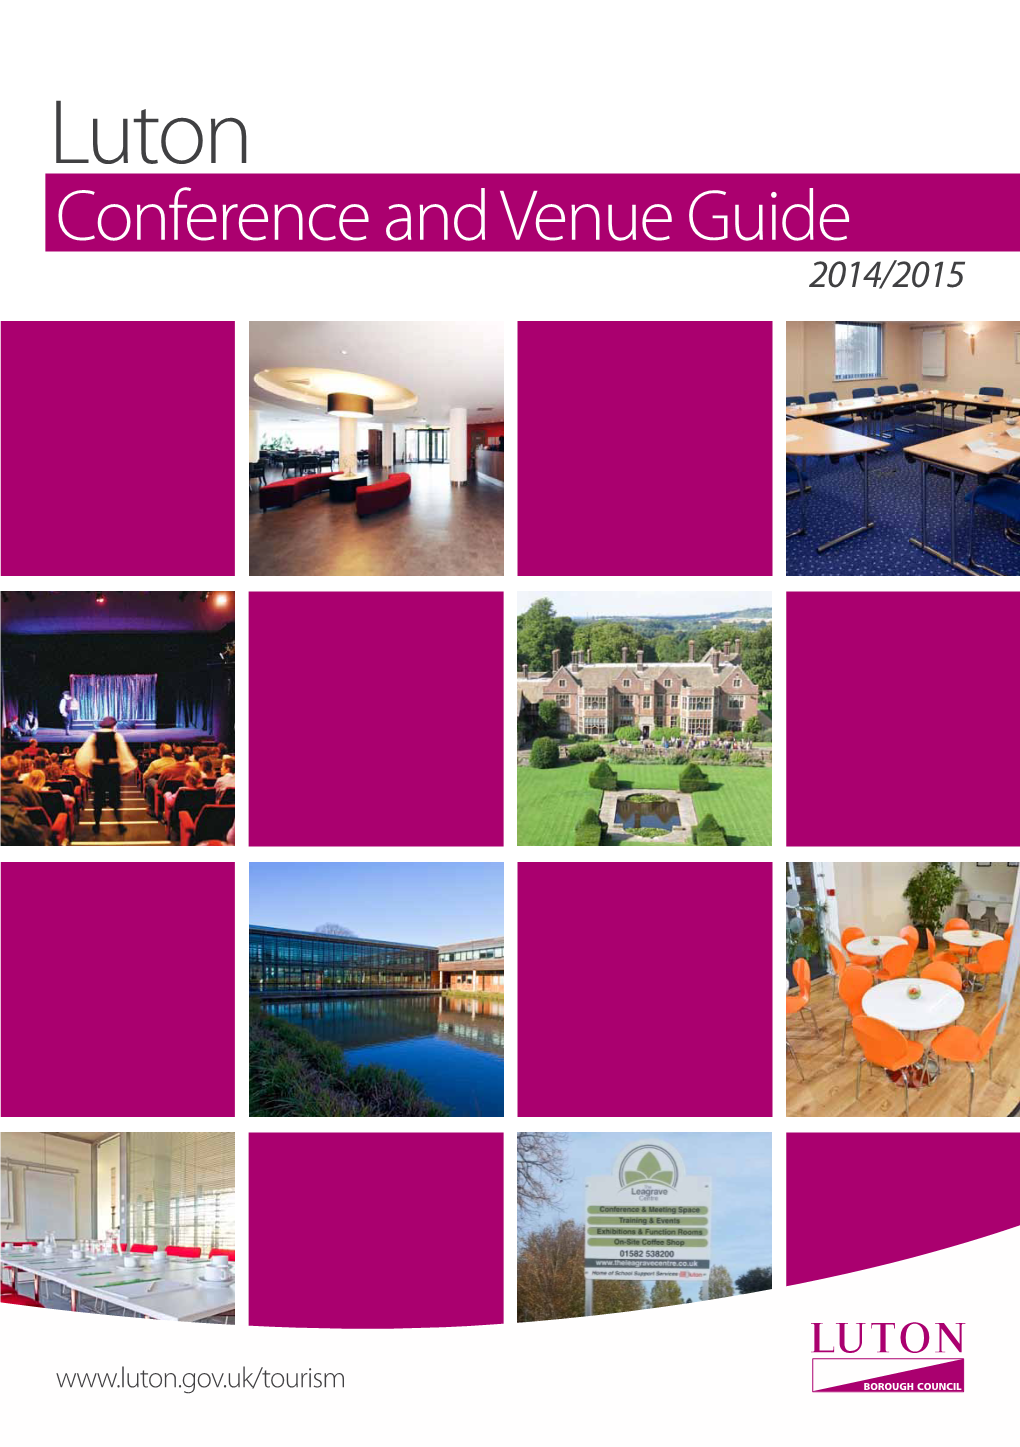 Conference and Venue Guide 2014/2015